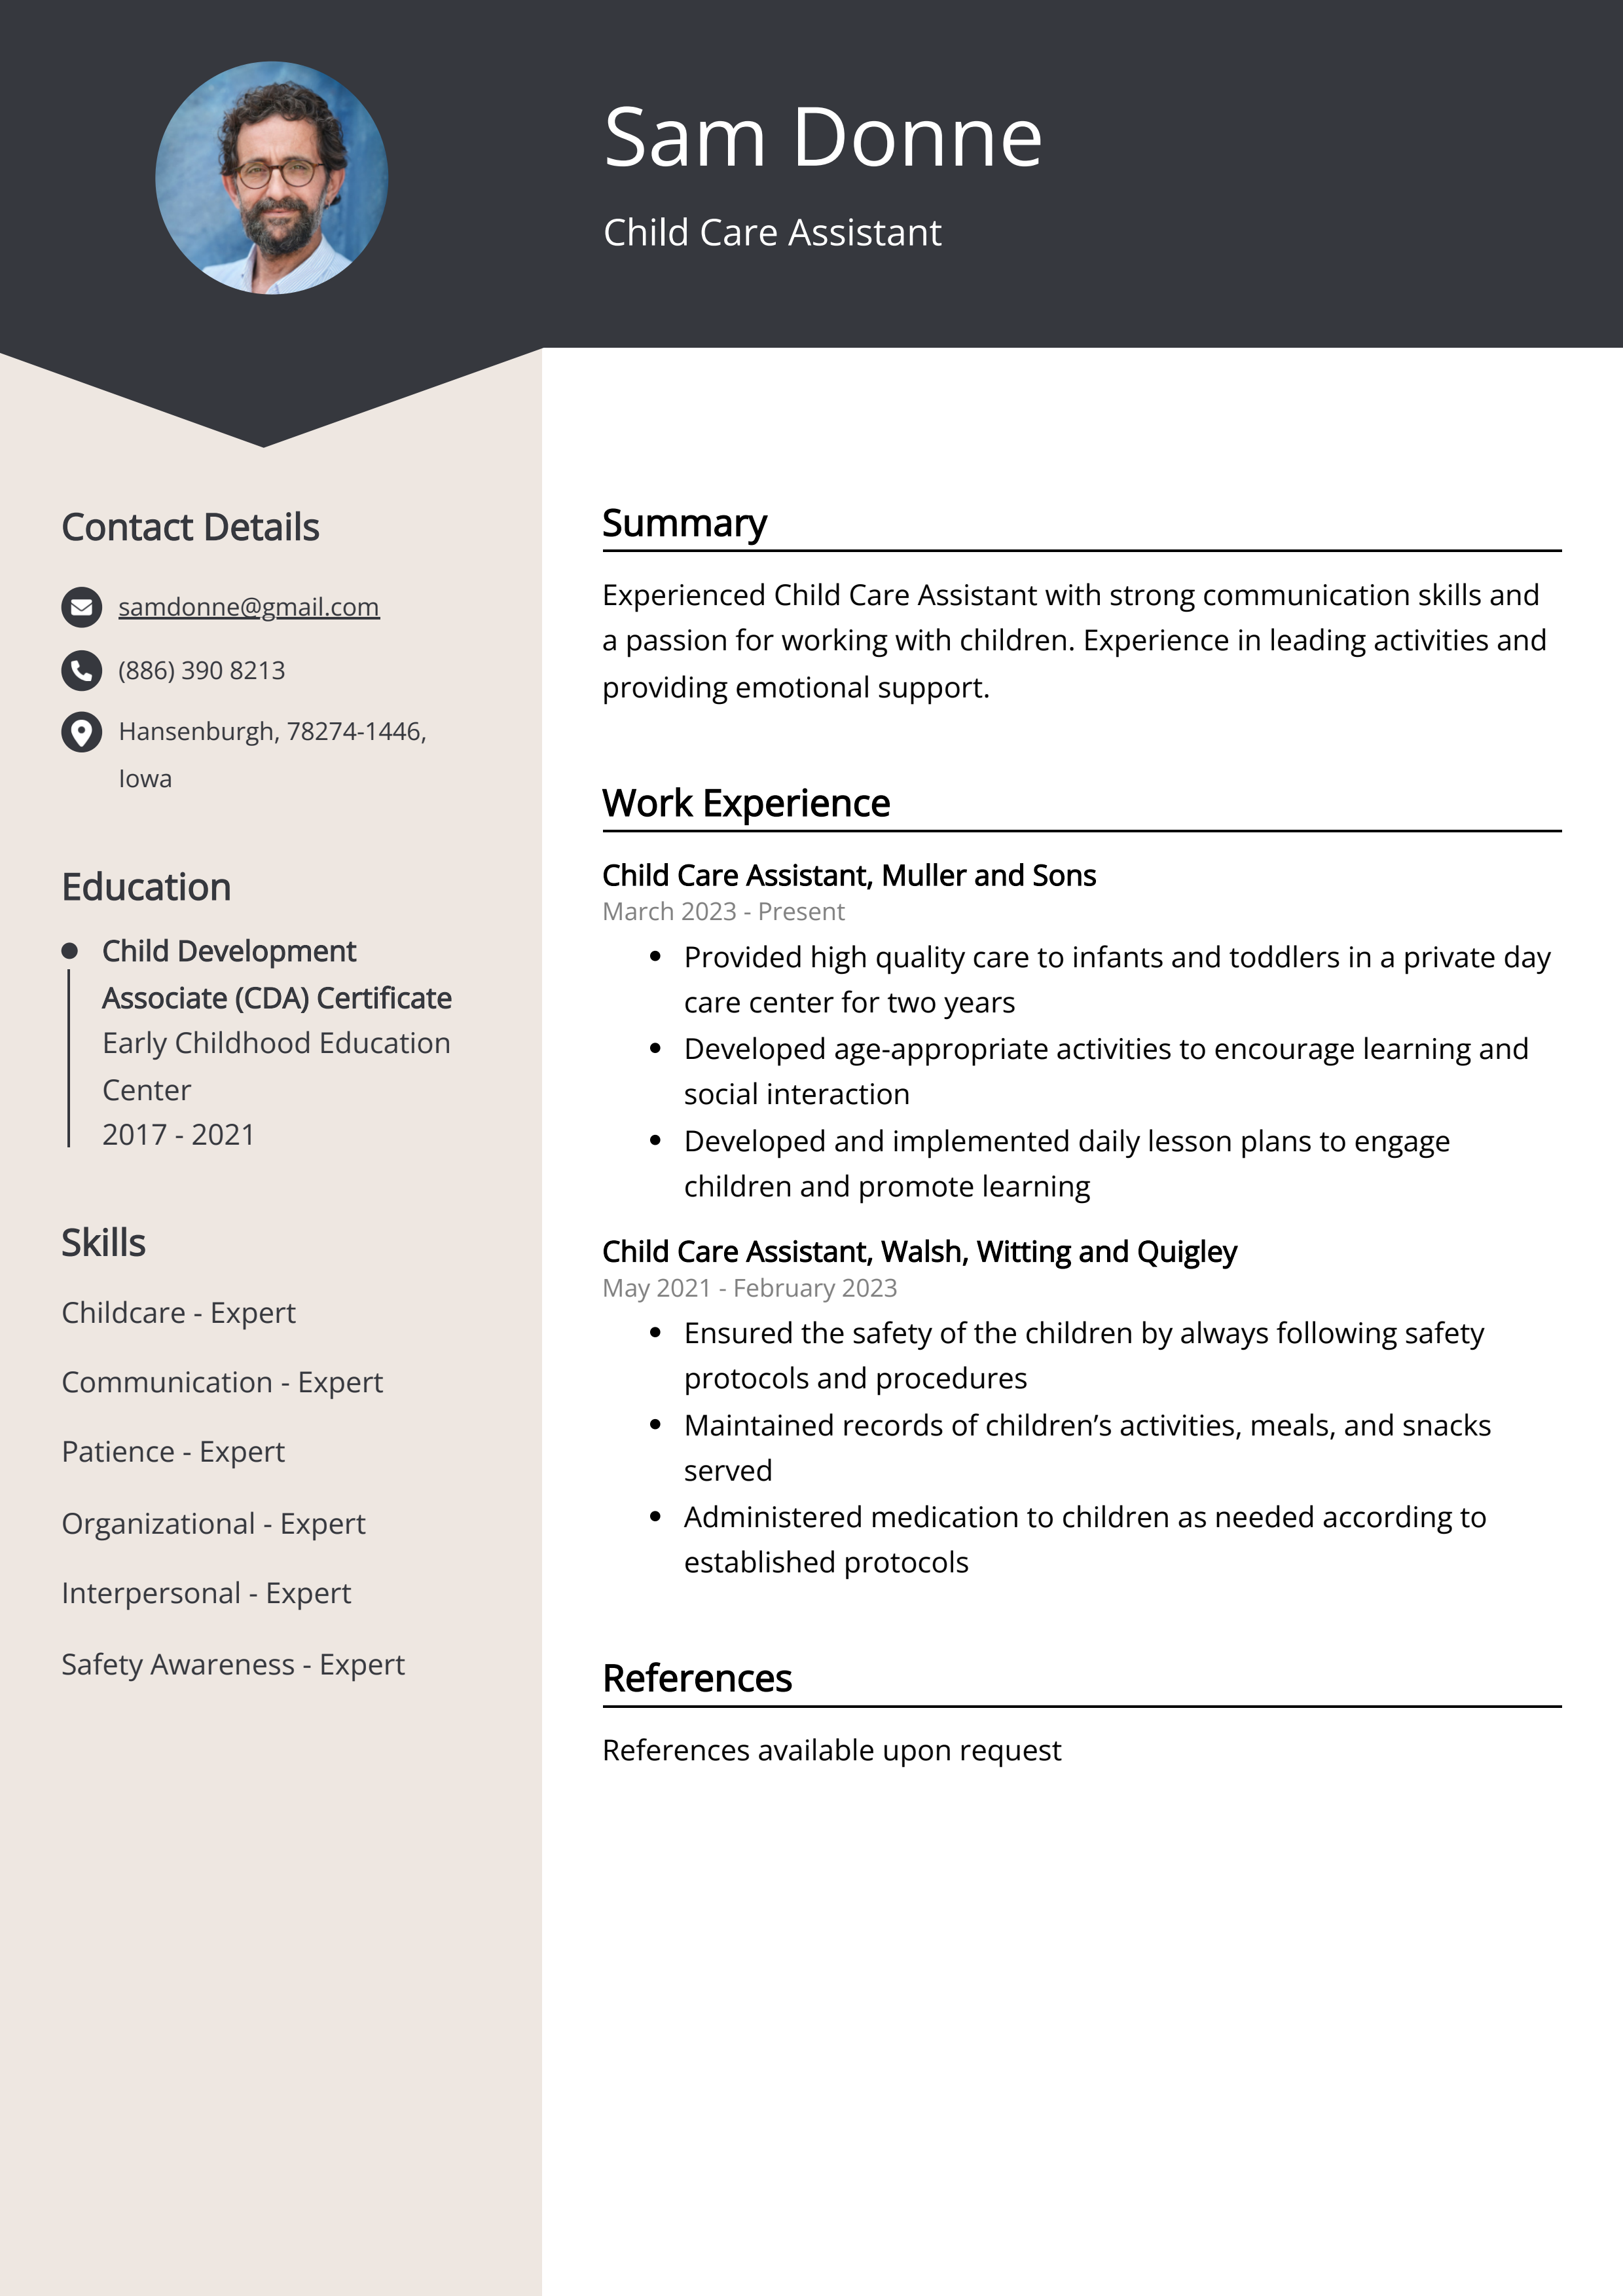 Child Care Assistant CV Example